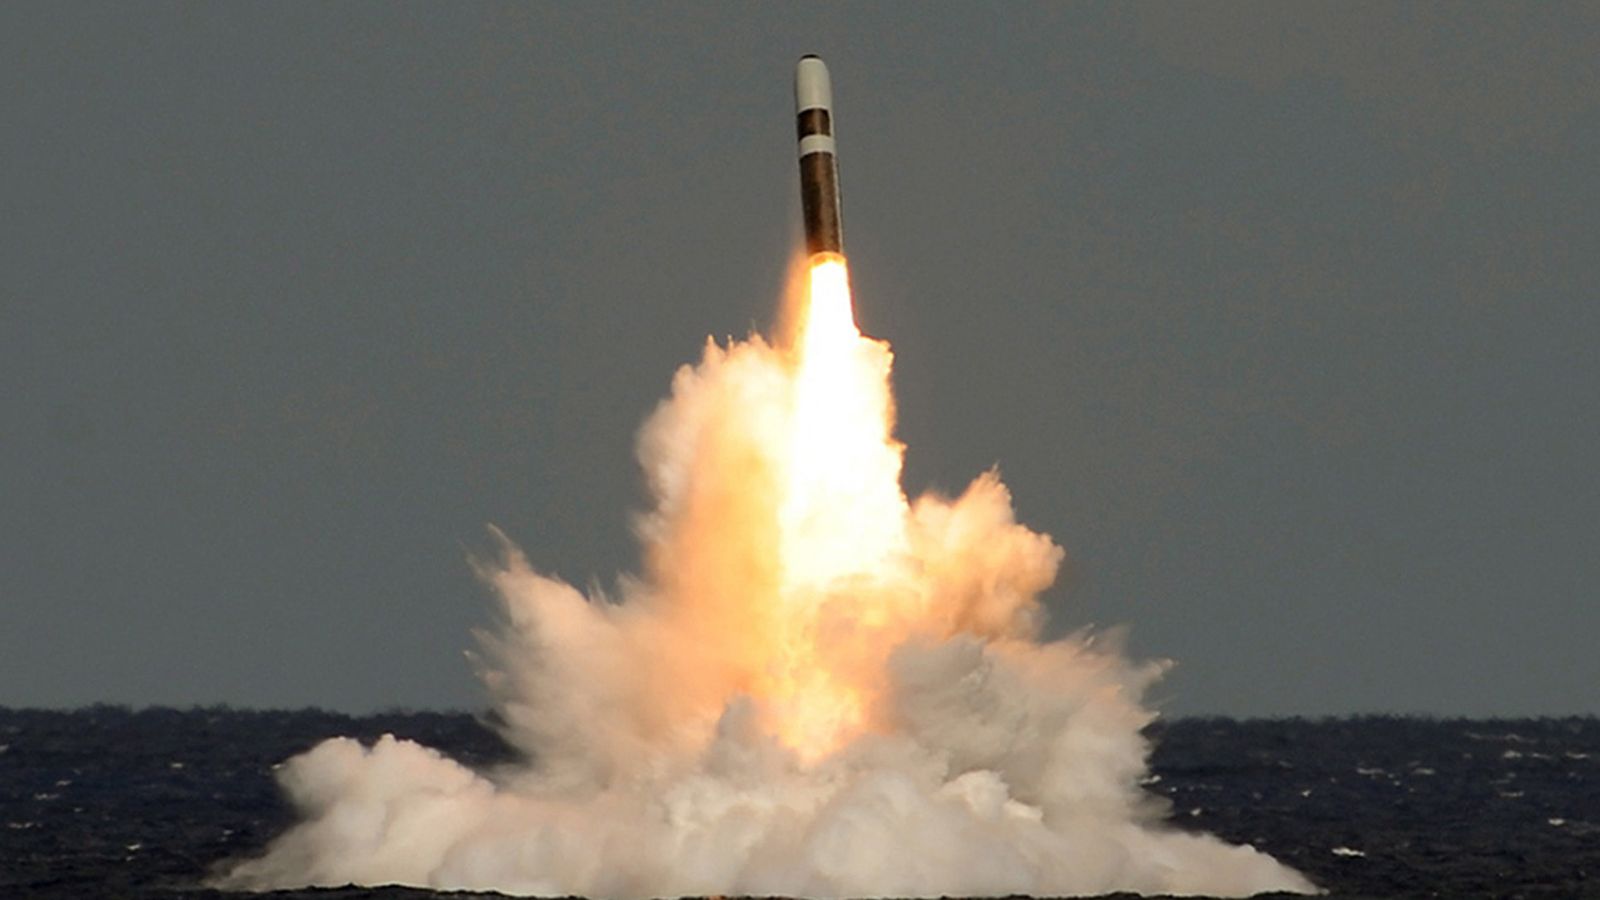 Trident missile misfired and crashed into ocean during rare test launch